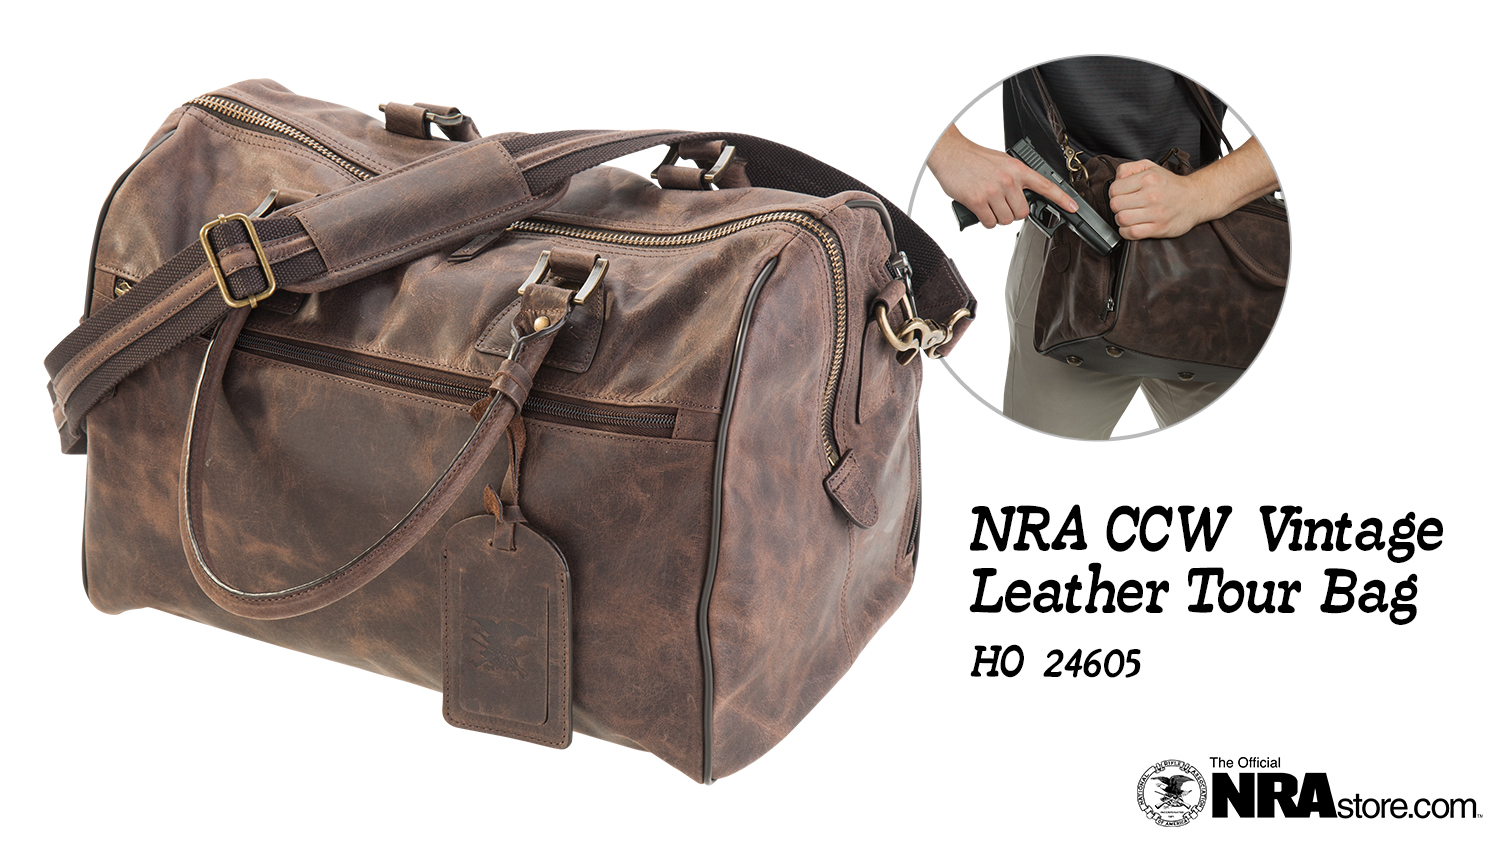 The Perfect CCW Travel Bag